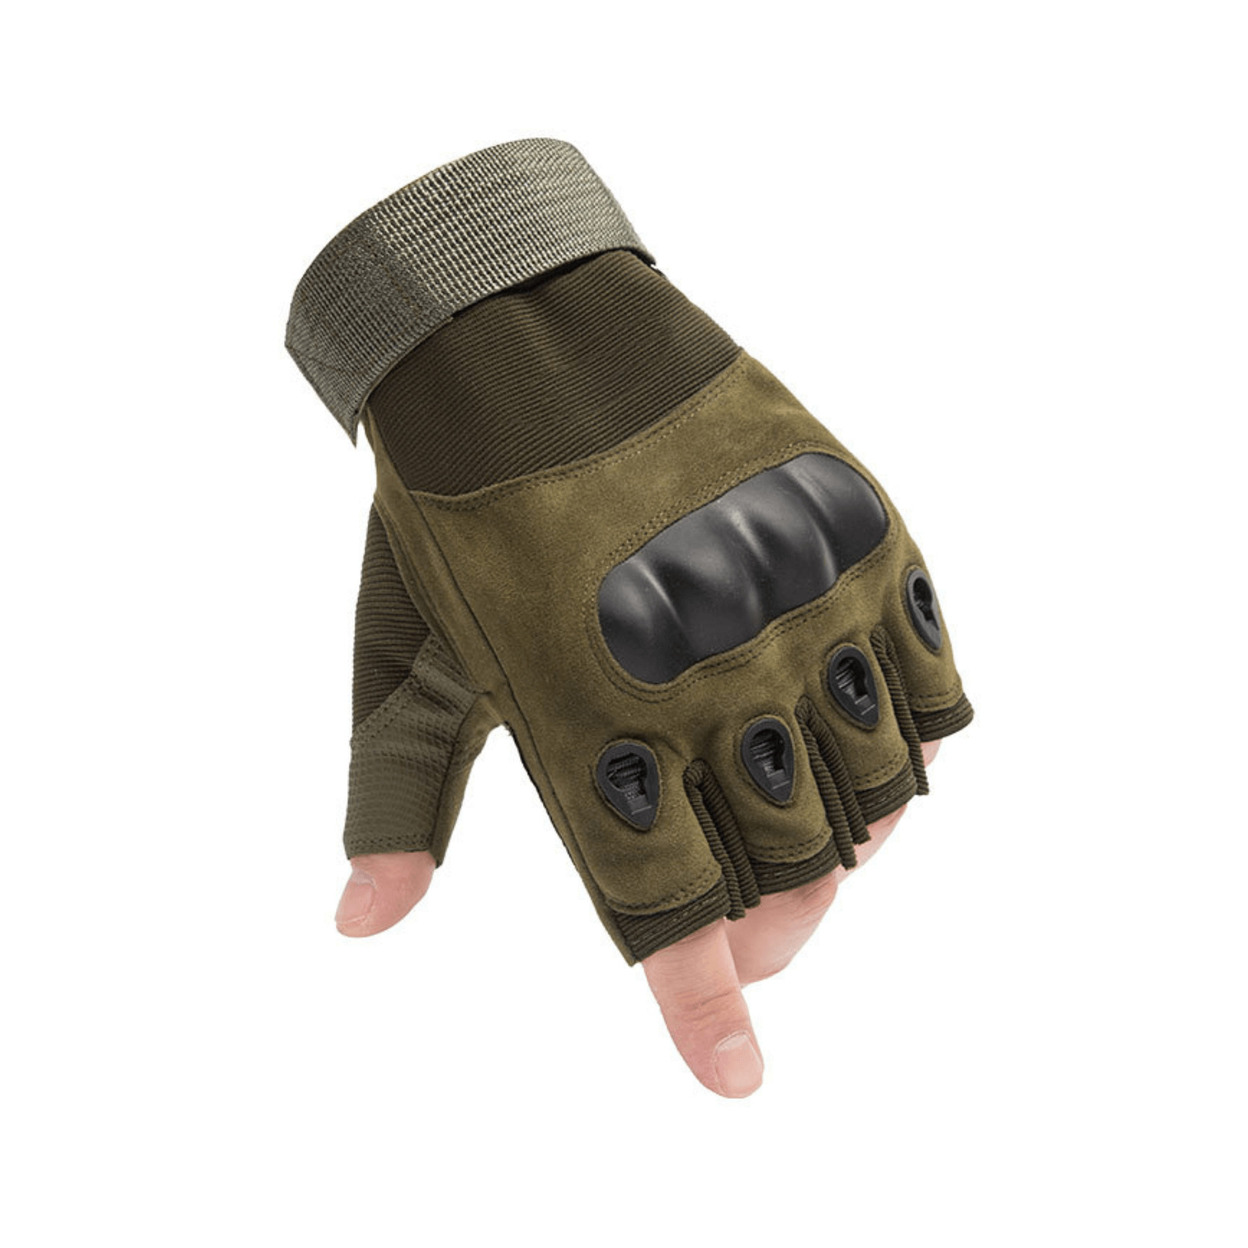 Tactical Fingerless Airsoft Gloves For Outdoor Sports, Paintball, And Motorcycling - Green, X-Large